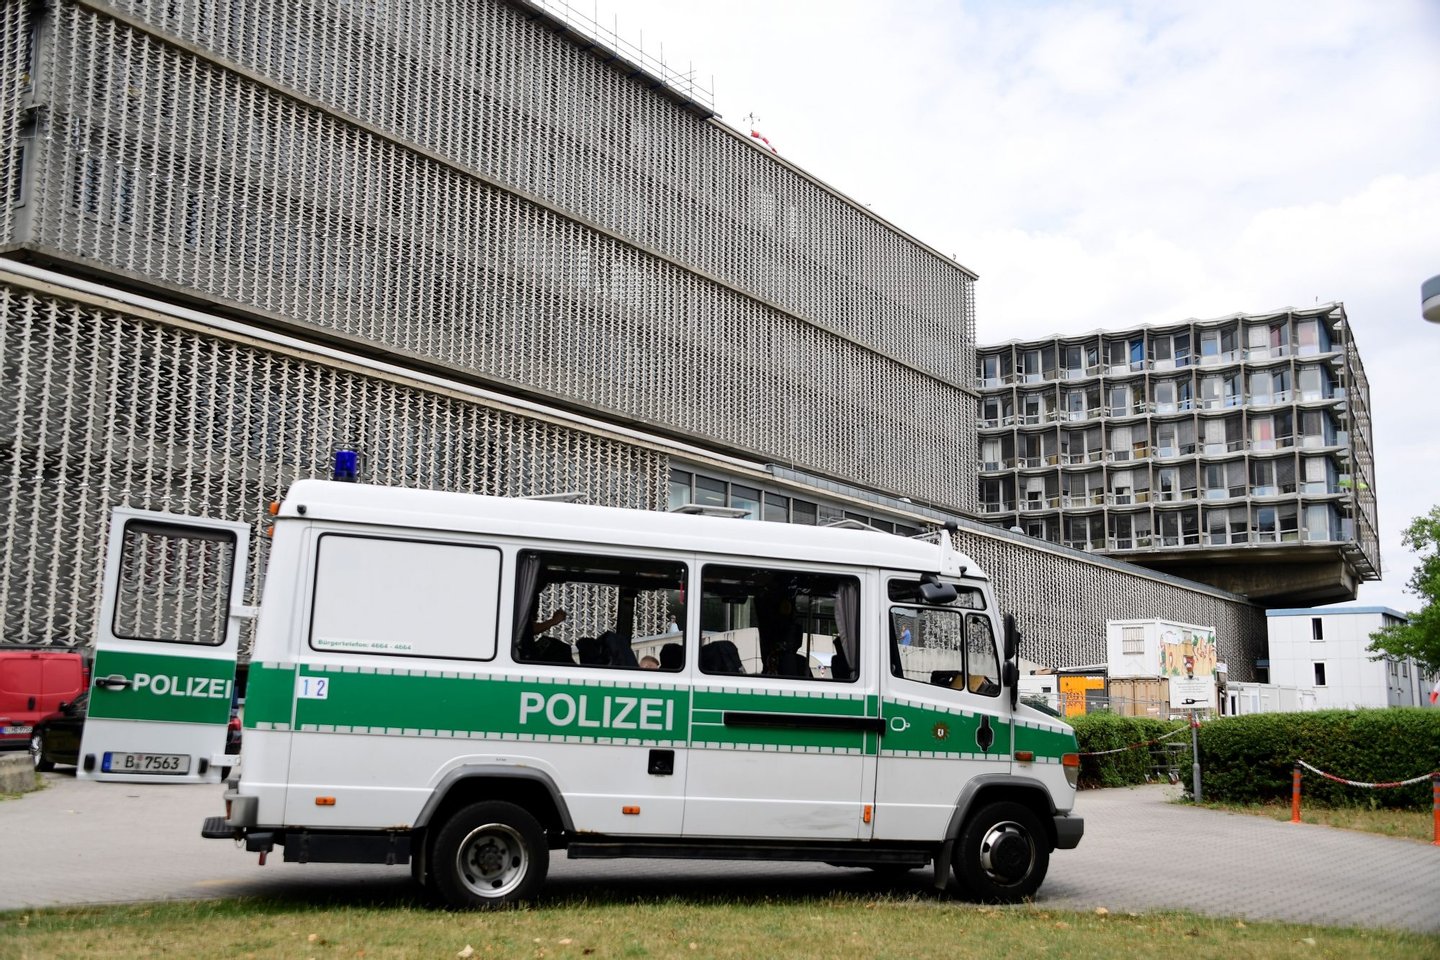 A police car is seen following a shooting on July 26, 2016 at a hospital in south-western Berlin. A patient shot a doctor before committing suicide at a Berlin hospital on Tuesday, police said, adding there was no sign the incident was a terrorist attack. / AFP / TOBIAS SCHWARZ (Photo credit should read TOBIAS SCHWARZ/AFP/Getty Images)